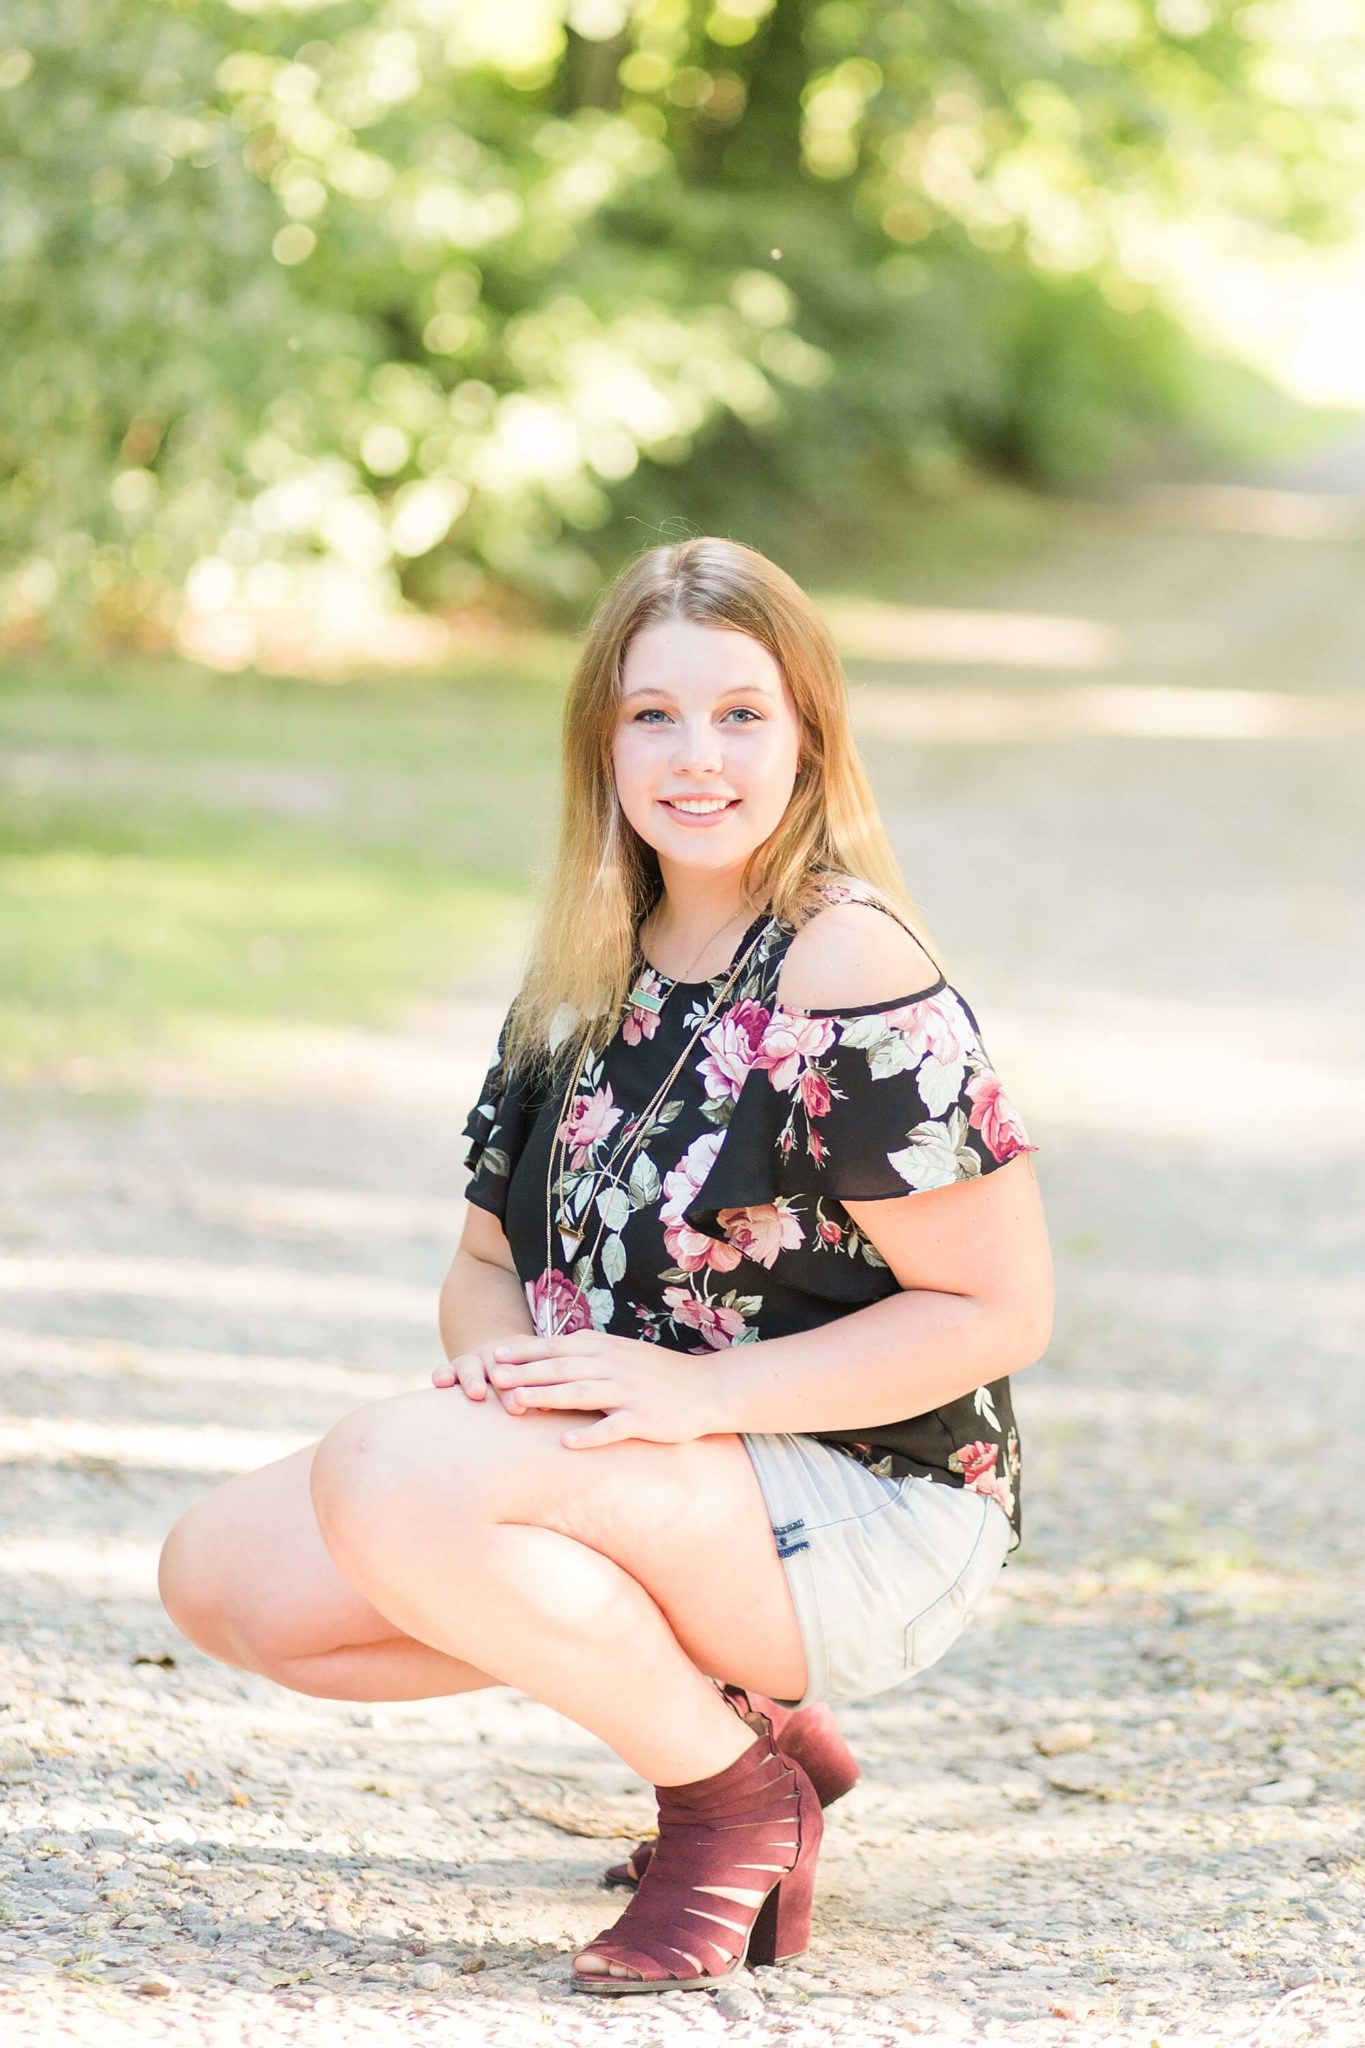 During a Lakeside Senior Portrait Session, a girl crouches down in maroon heels and a floral shirt.